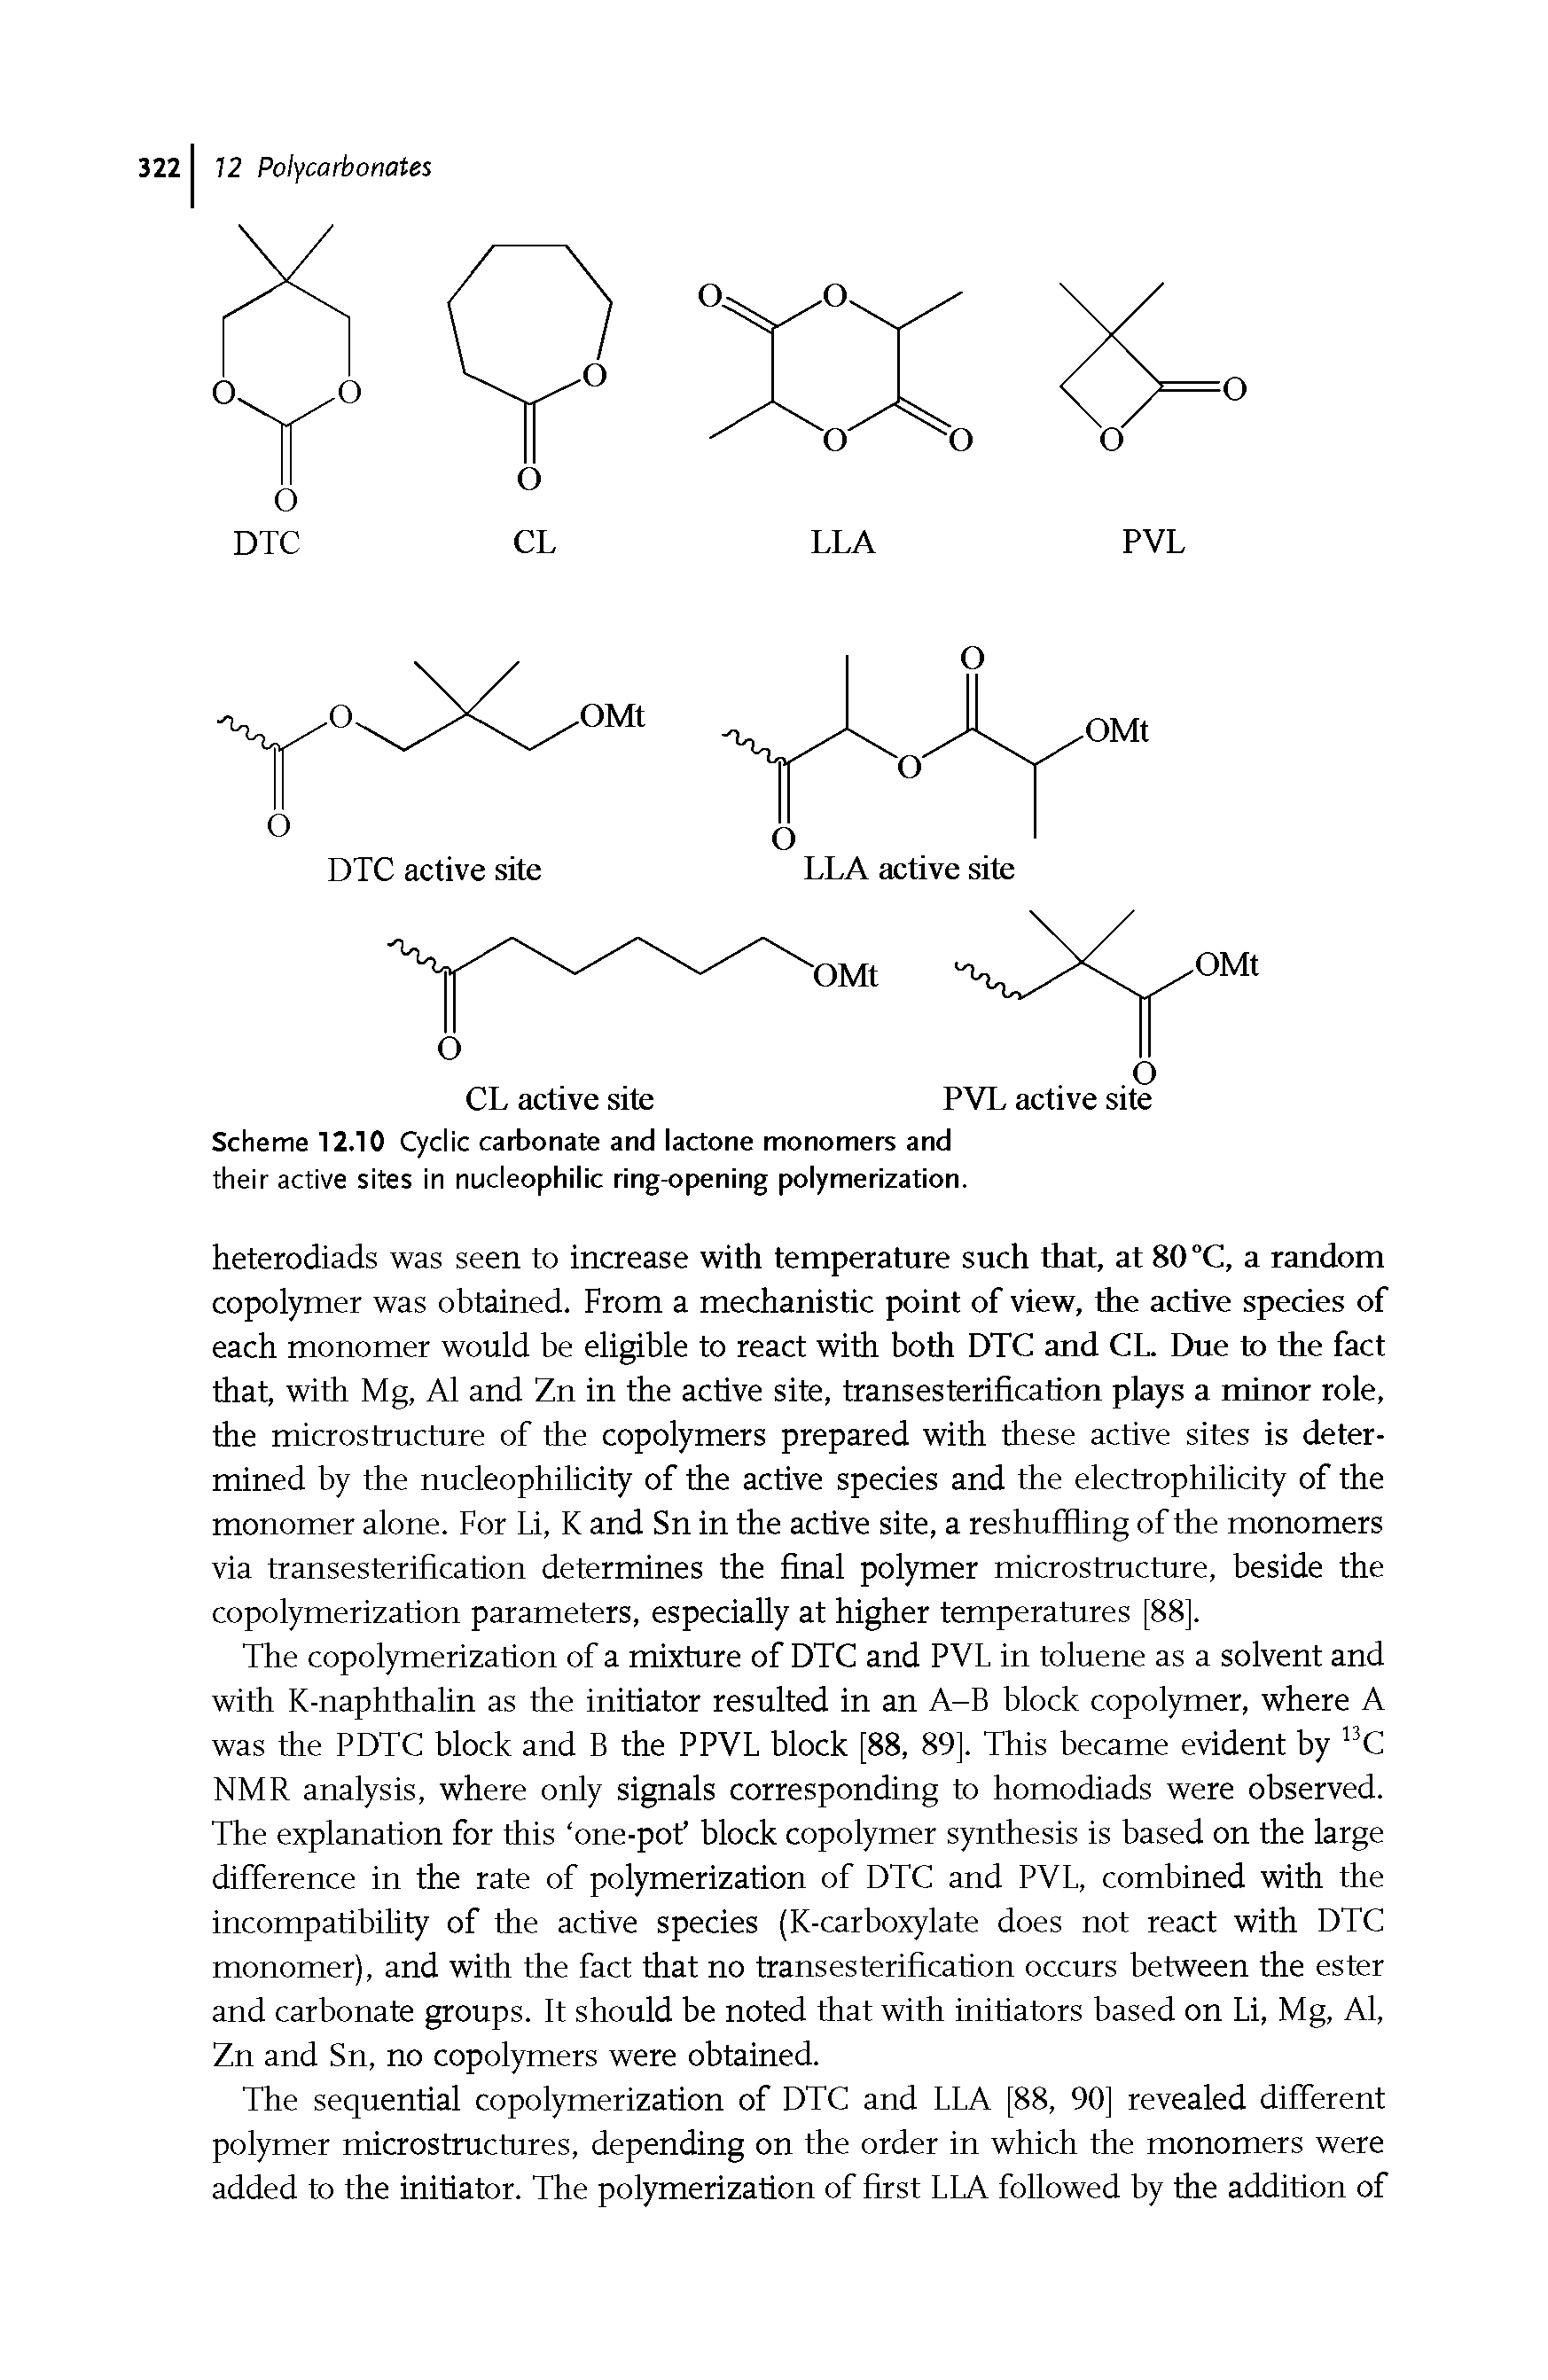 Scheme 12.10 Cyclic carbonate and lactone monomers and their active sites in nucleophilic ring-opening polymerization.